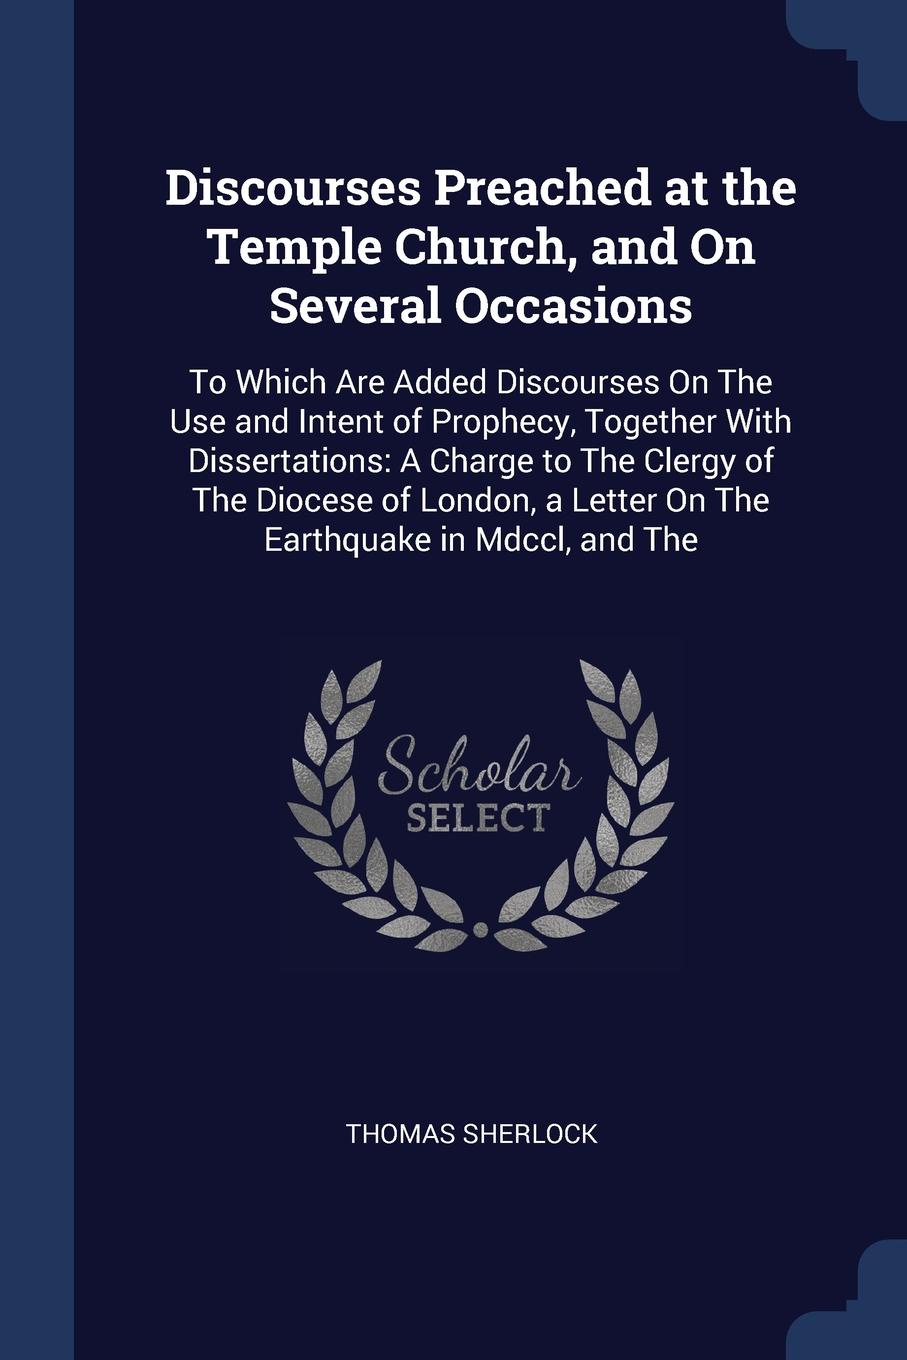 Discourses Preached at the Temple Church, and On Several Occasions. To Which Are Added Discourses On The Use and Intent of Prophecy, Together With Dissertations: A Charge to The Clergy of The Diocese of London, a Letter On The Earthquake in Mdccl,...